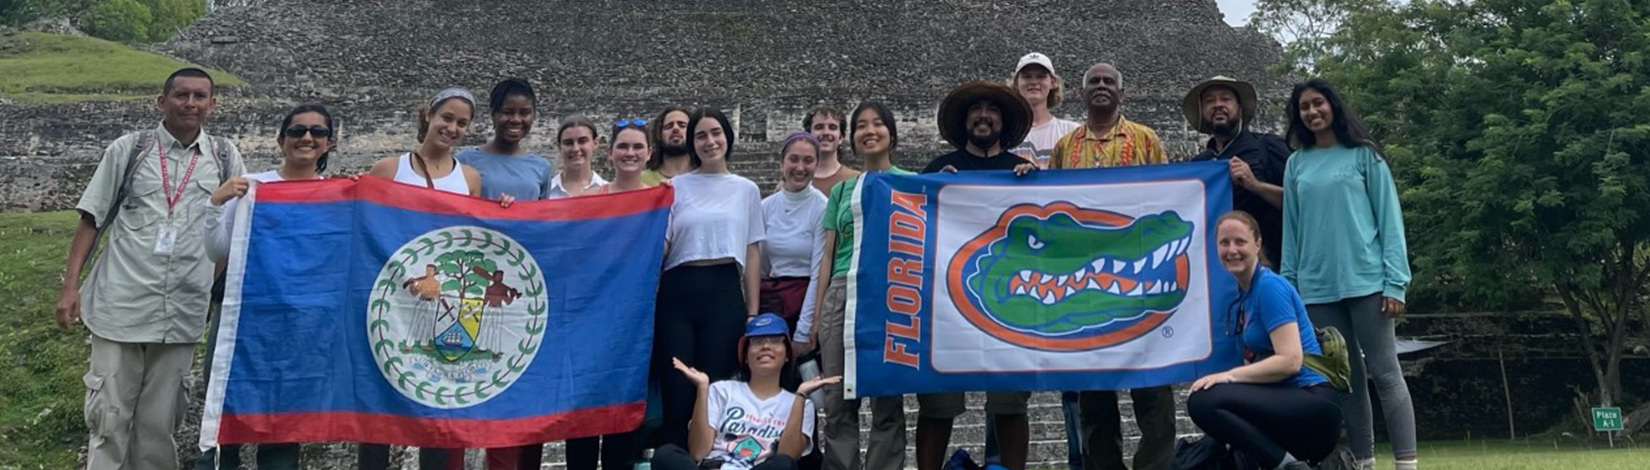 Students hold a Belize national flag on the left while students hold a Florida with a gator head flag on the right posing in front of an Aztec structure.